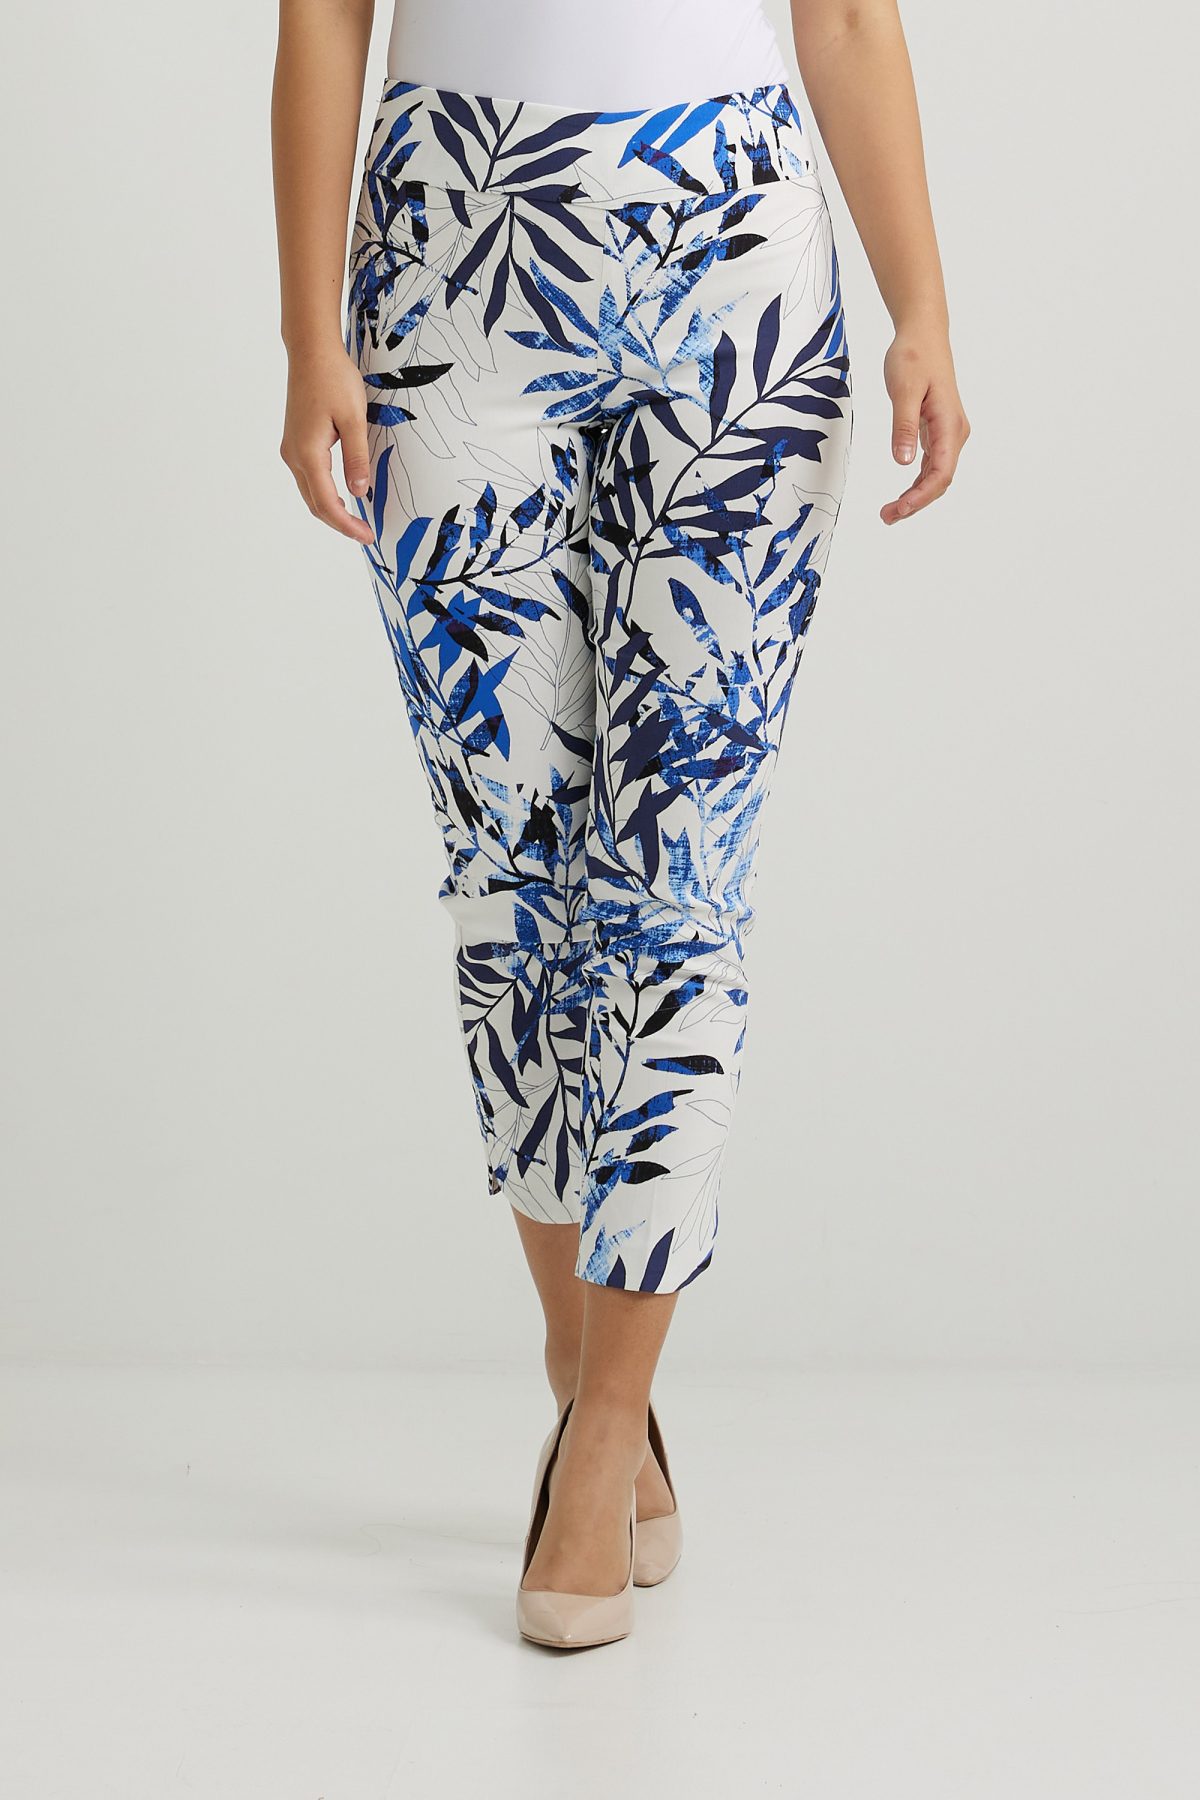 Joseph Ribkoff 222010 Print Cropped Pant| Ooh Ooh Shoes women's clothing and shoe boutique located in Naples, Charleston and Mashpee